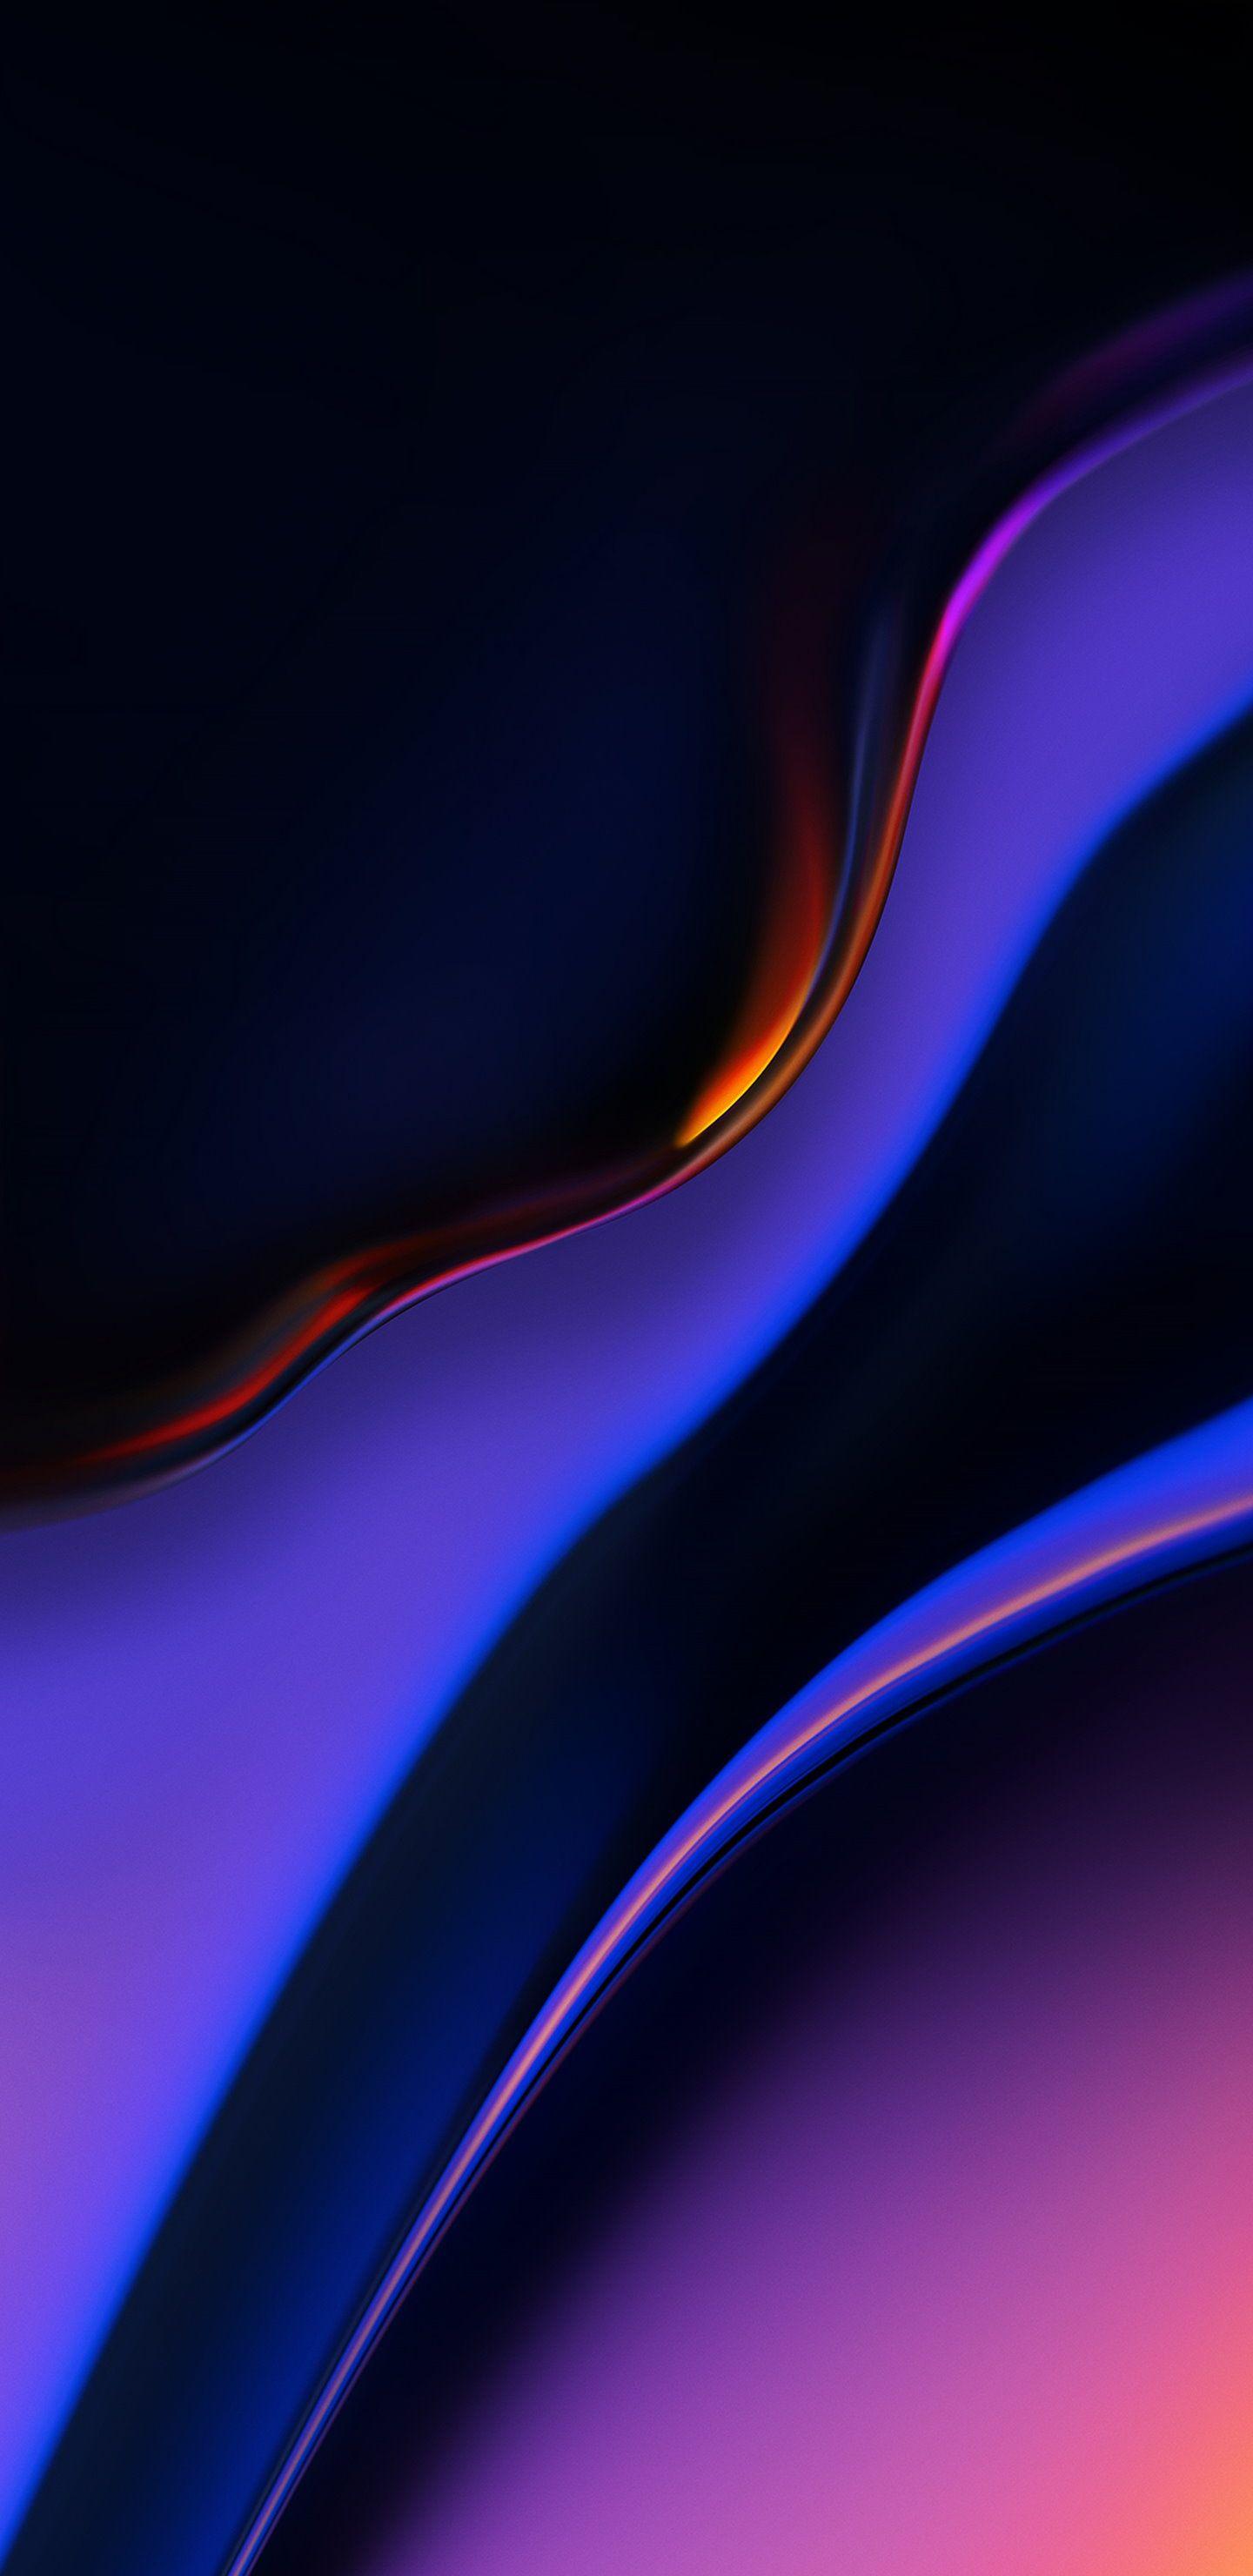 New Samsung Wallpapers - Top Free New